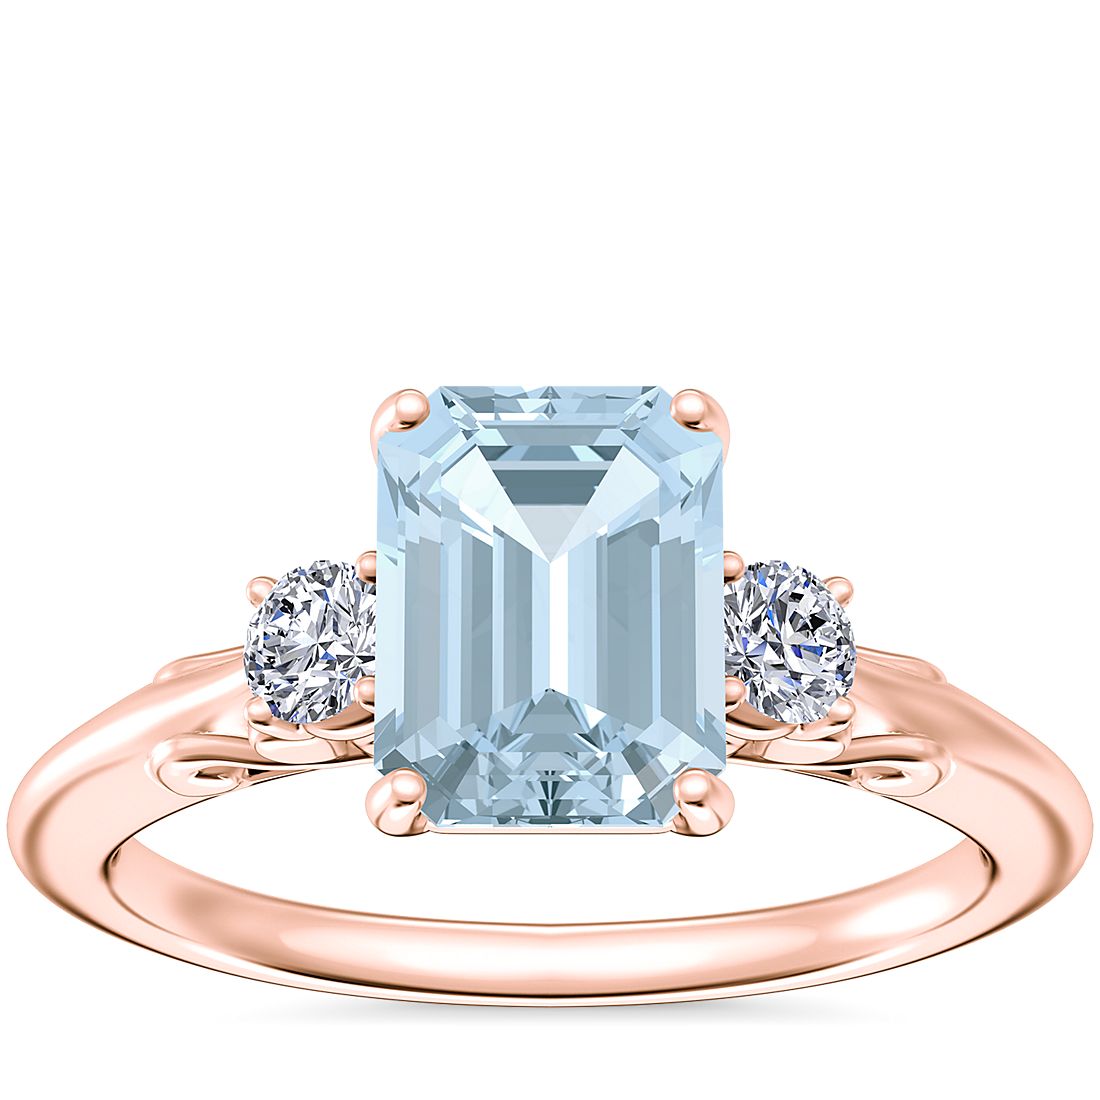 Vintage Three Stone Engagement Ring with Emerald-Cut Aquamarine in 18k Rose Gold (8x6mm)